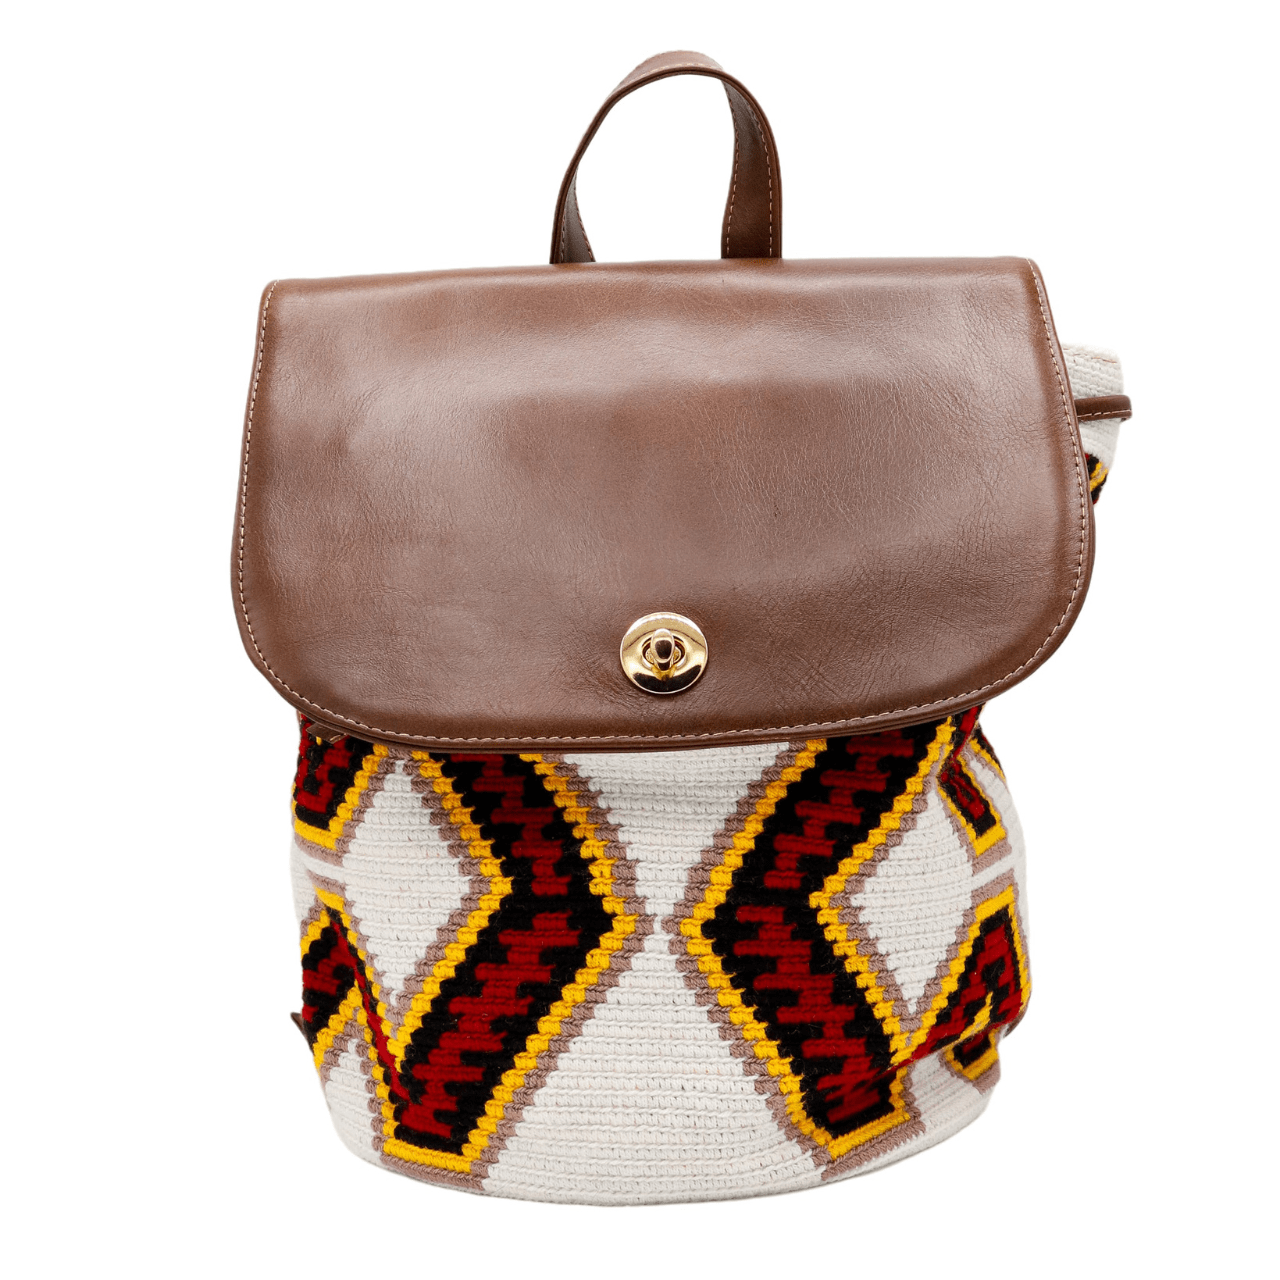  Nini backpack featuring a Wayuu body in a vibrant combination of white, red, yellow, and black, adorned with stylish accents in genuine leather. The backpack showcases a convenient side pocket and a secure double closing mechanism.